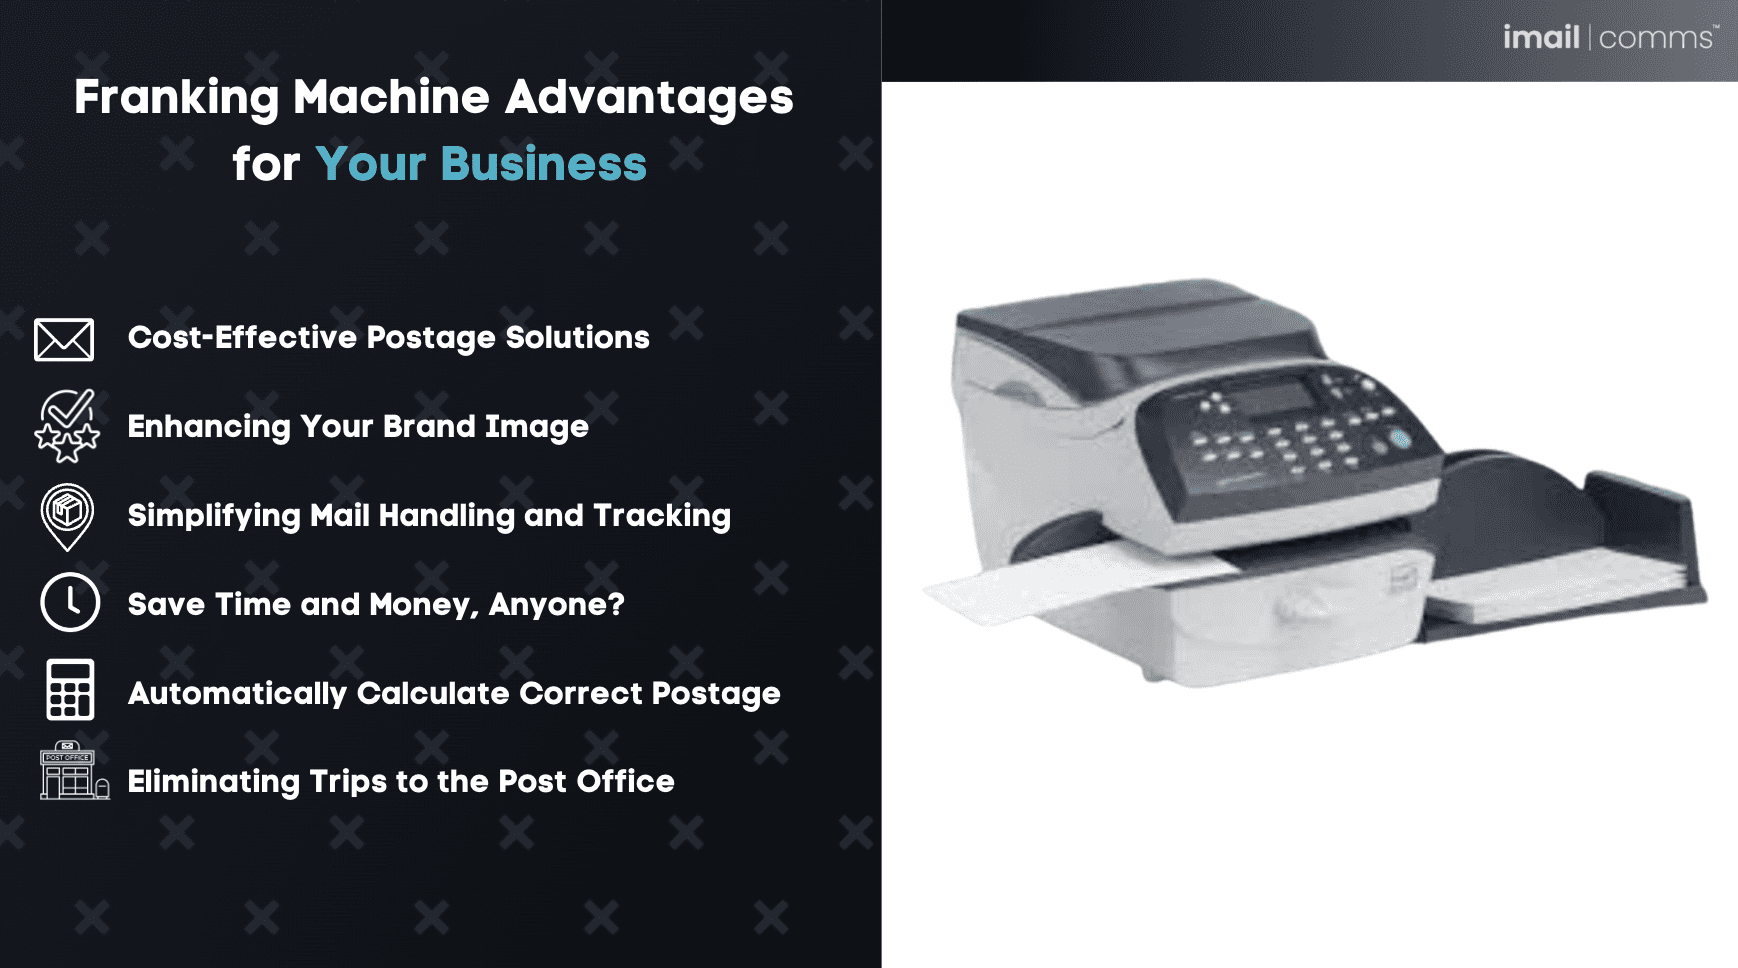 A franking machine with a list of its advantages